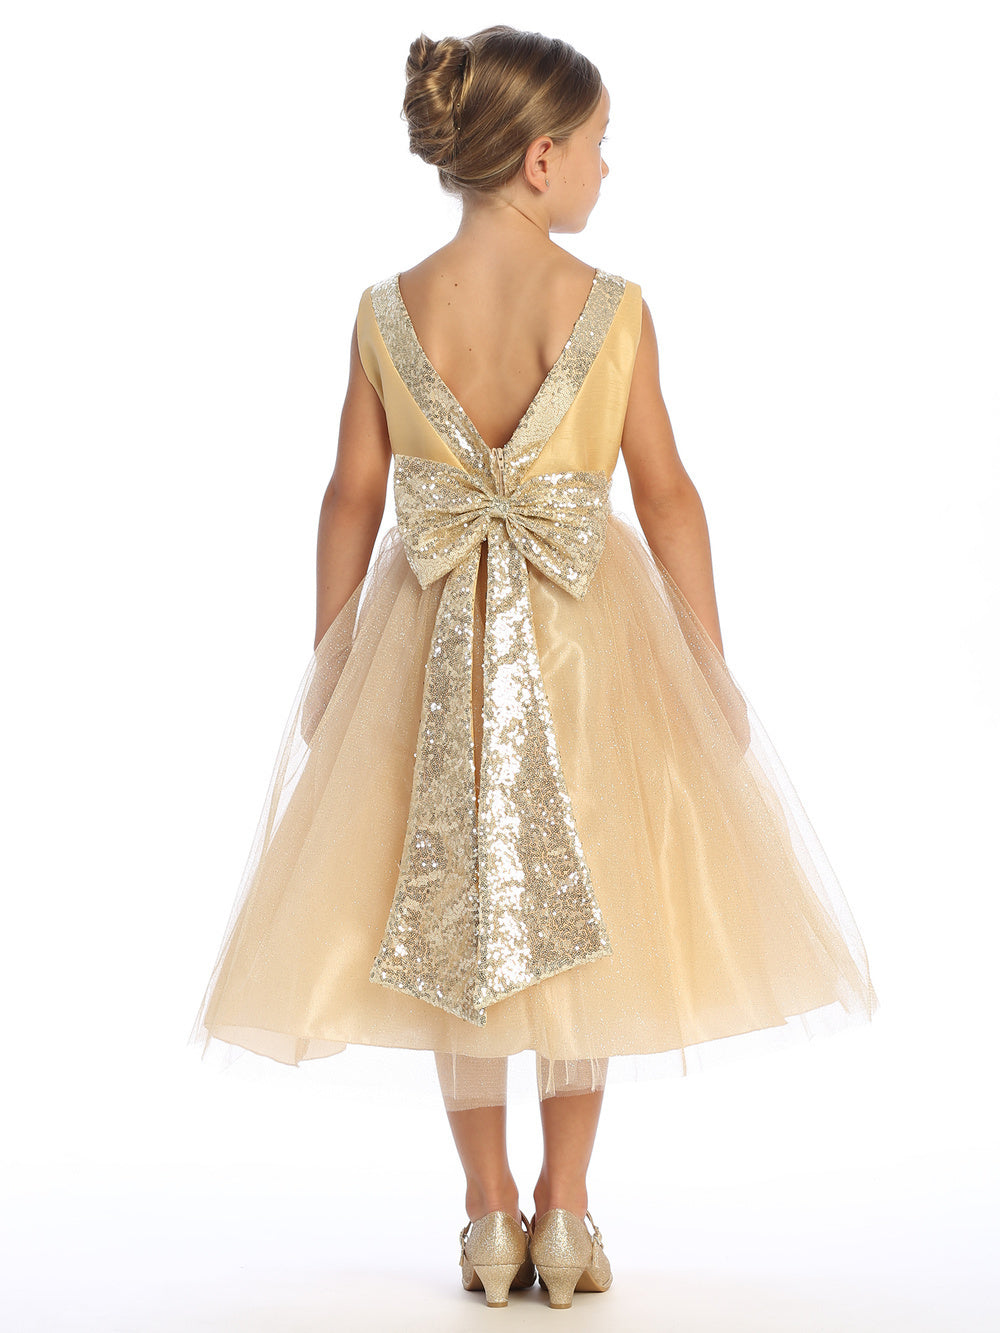 Golden enchantment, flower girl in shantung dress adorned with sparkle tulle and sequins.